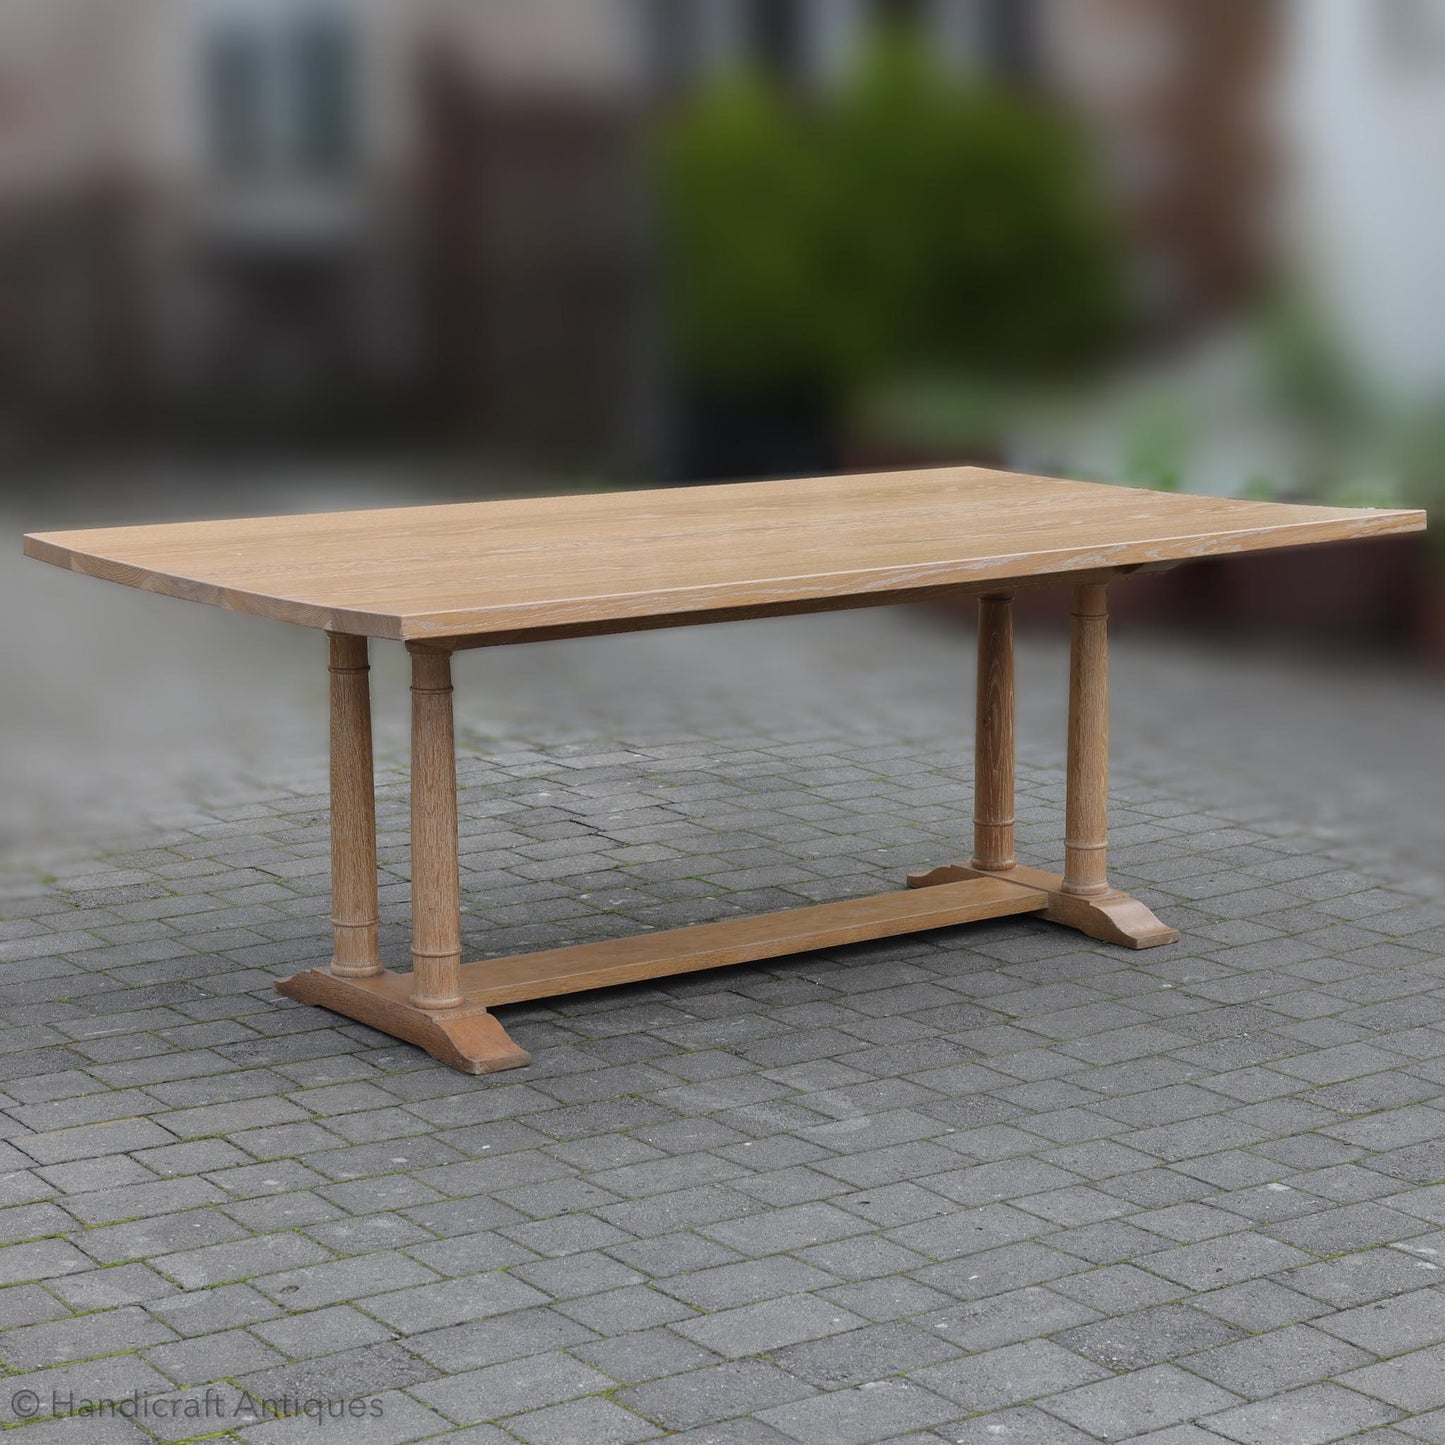 Heal and Co [Ambrose Heal] Tilden Arts & Crafts Cotswold School Oak Dining Table